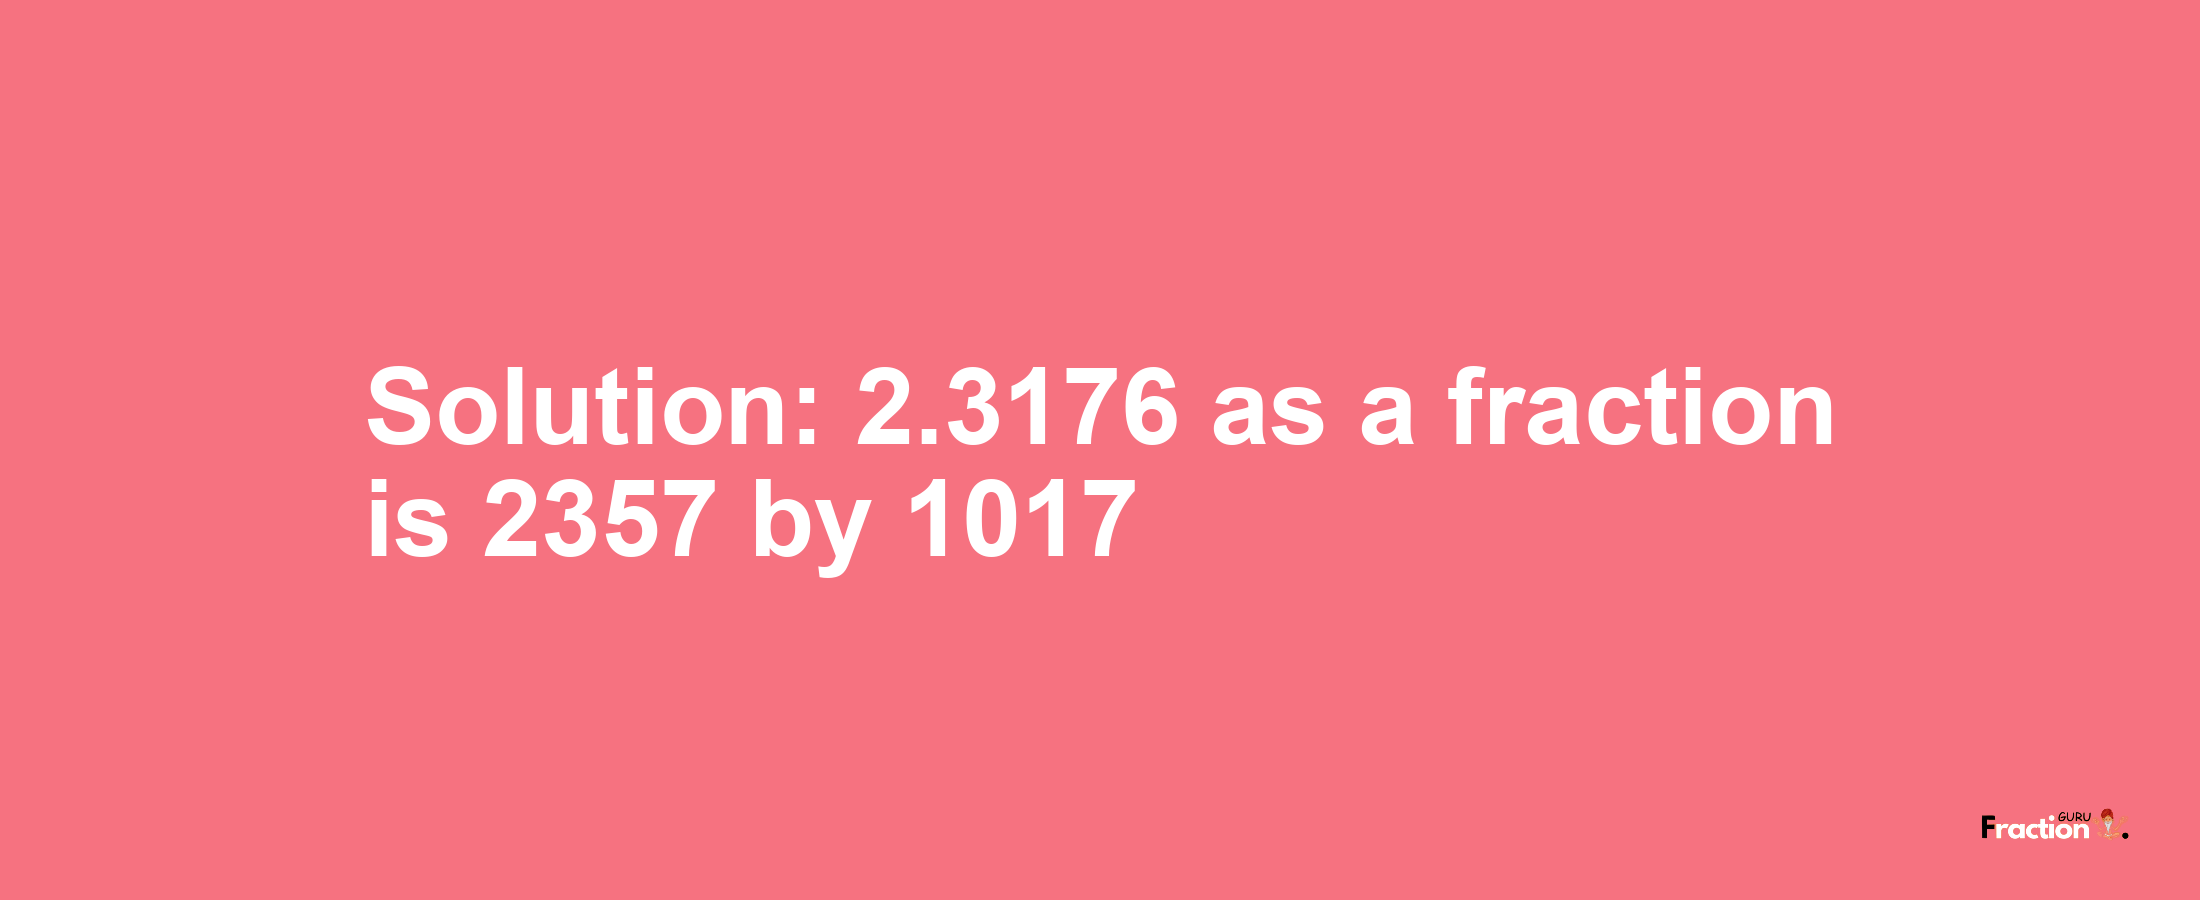 Solution:2.3176 as a fraction is 2357/1017